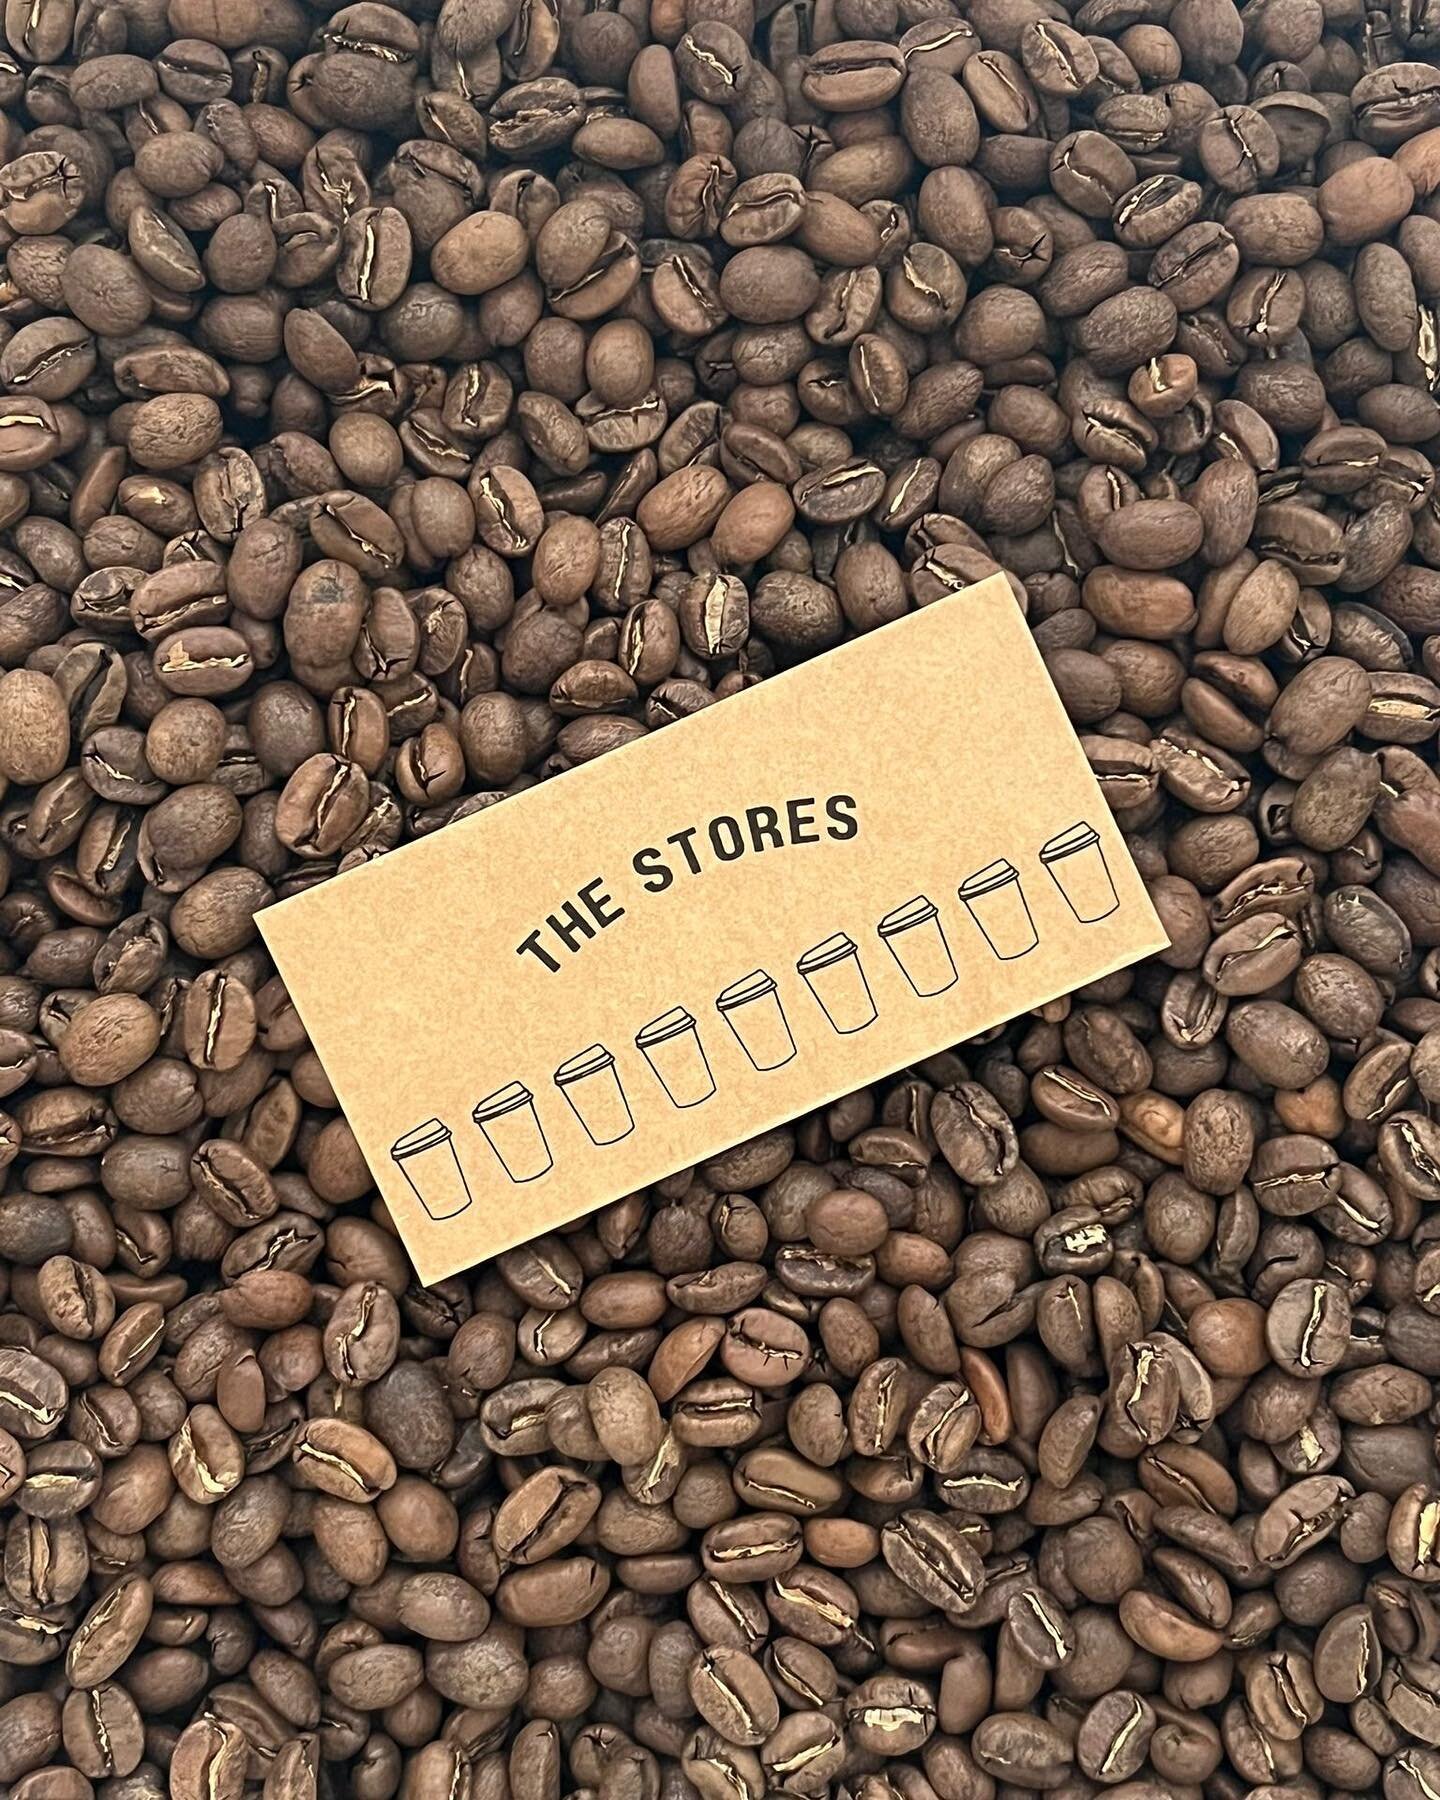 We&rsquo;re excited to share that we will be serving @sundaycoffee at The Stores. 

Exceptional flavour and exceptionally high standards for growers. Perfection ☕️